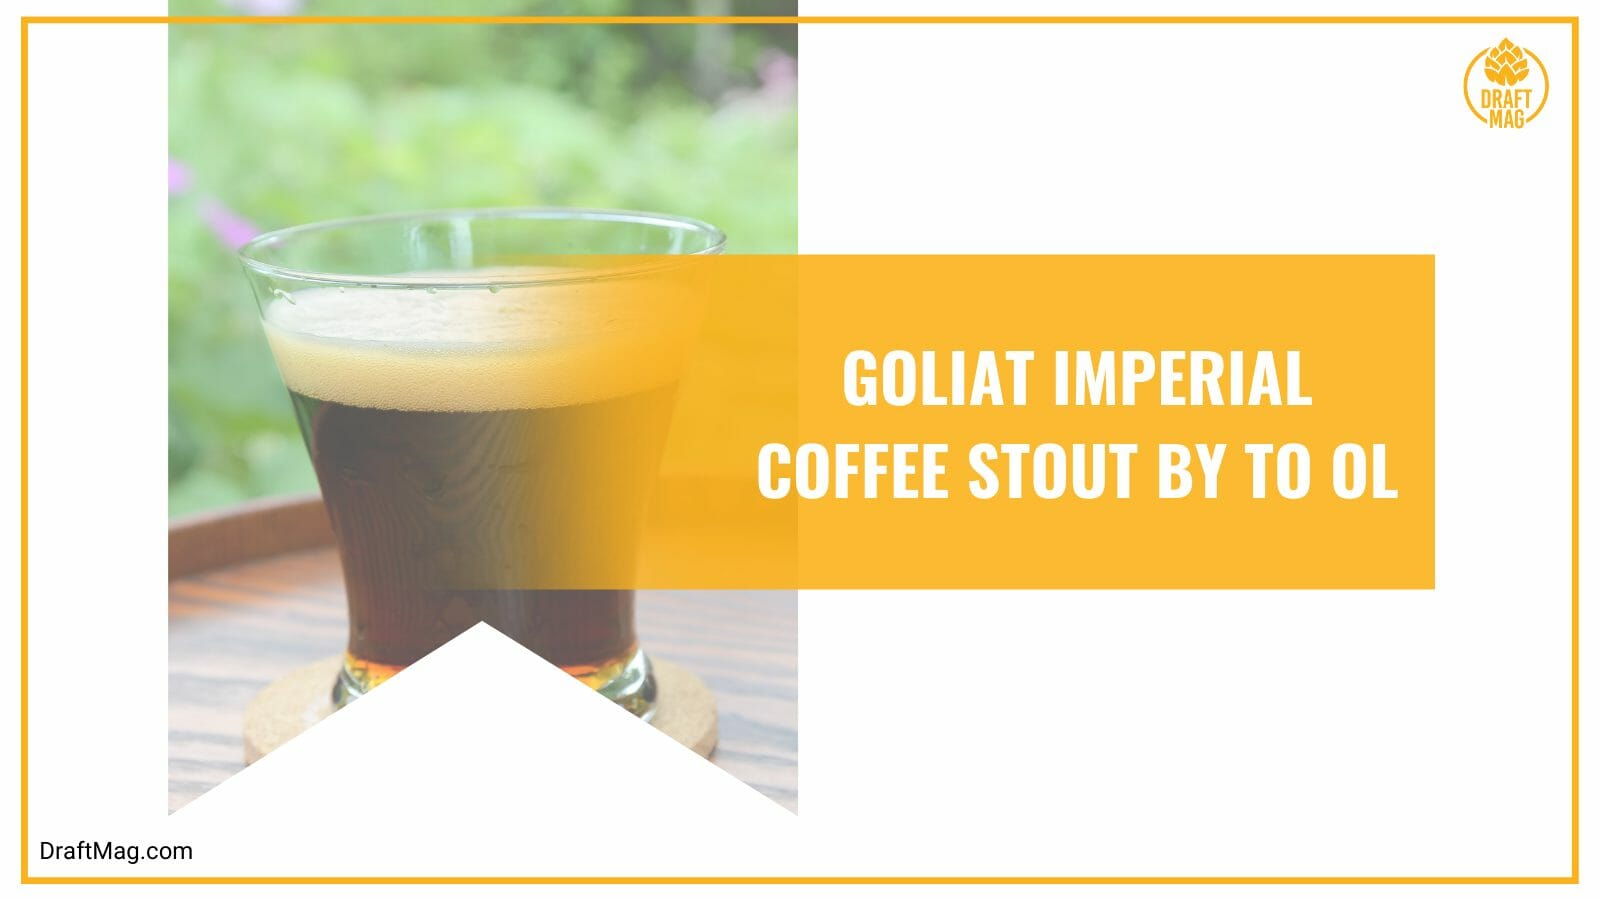 Goliat imperial coffee stout